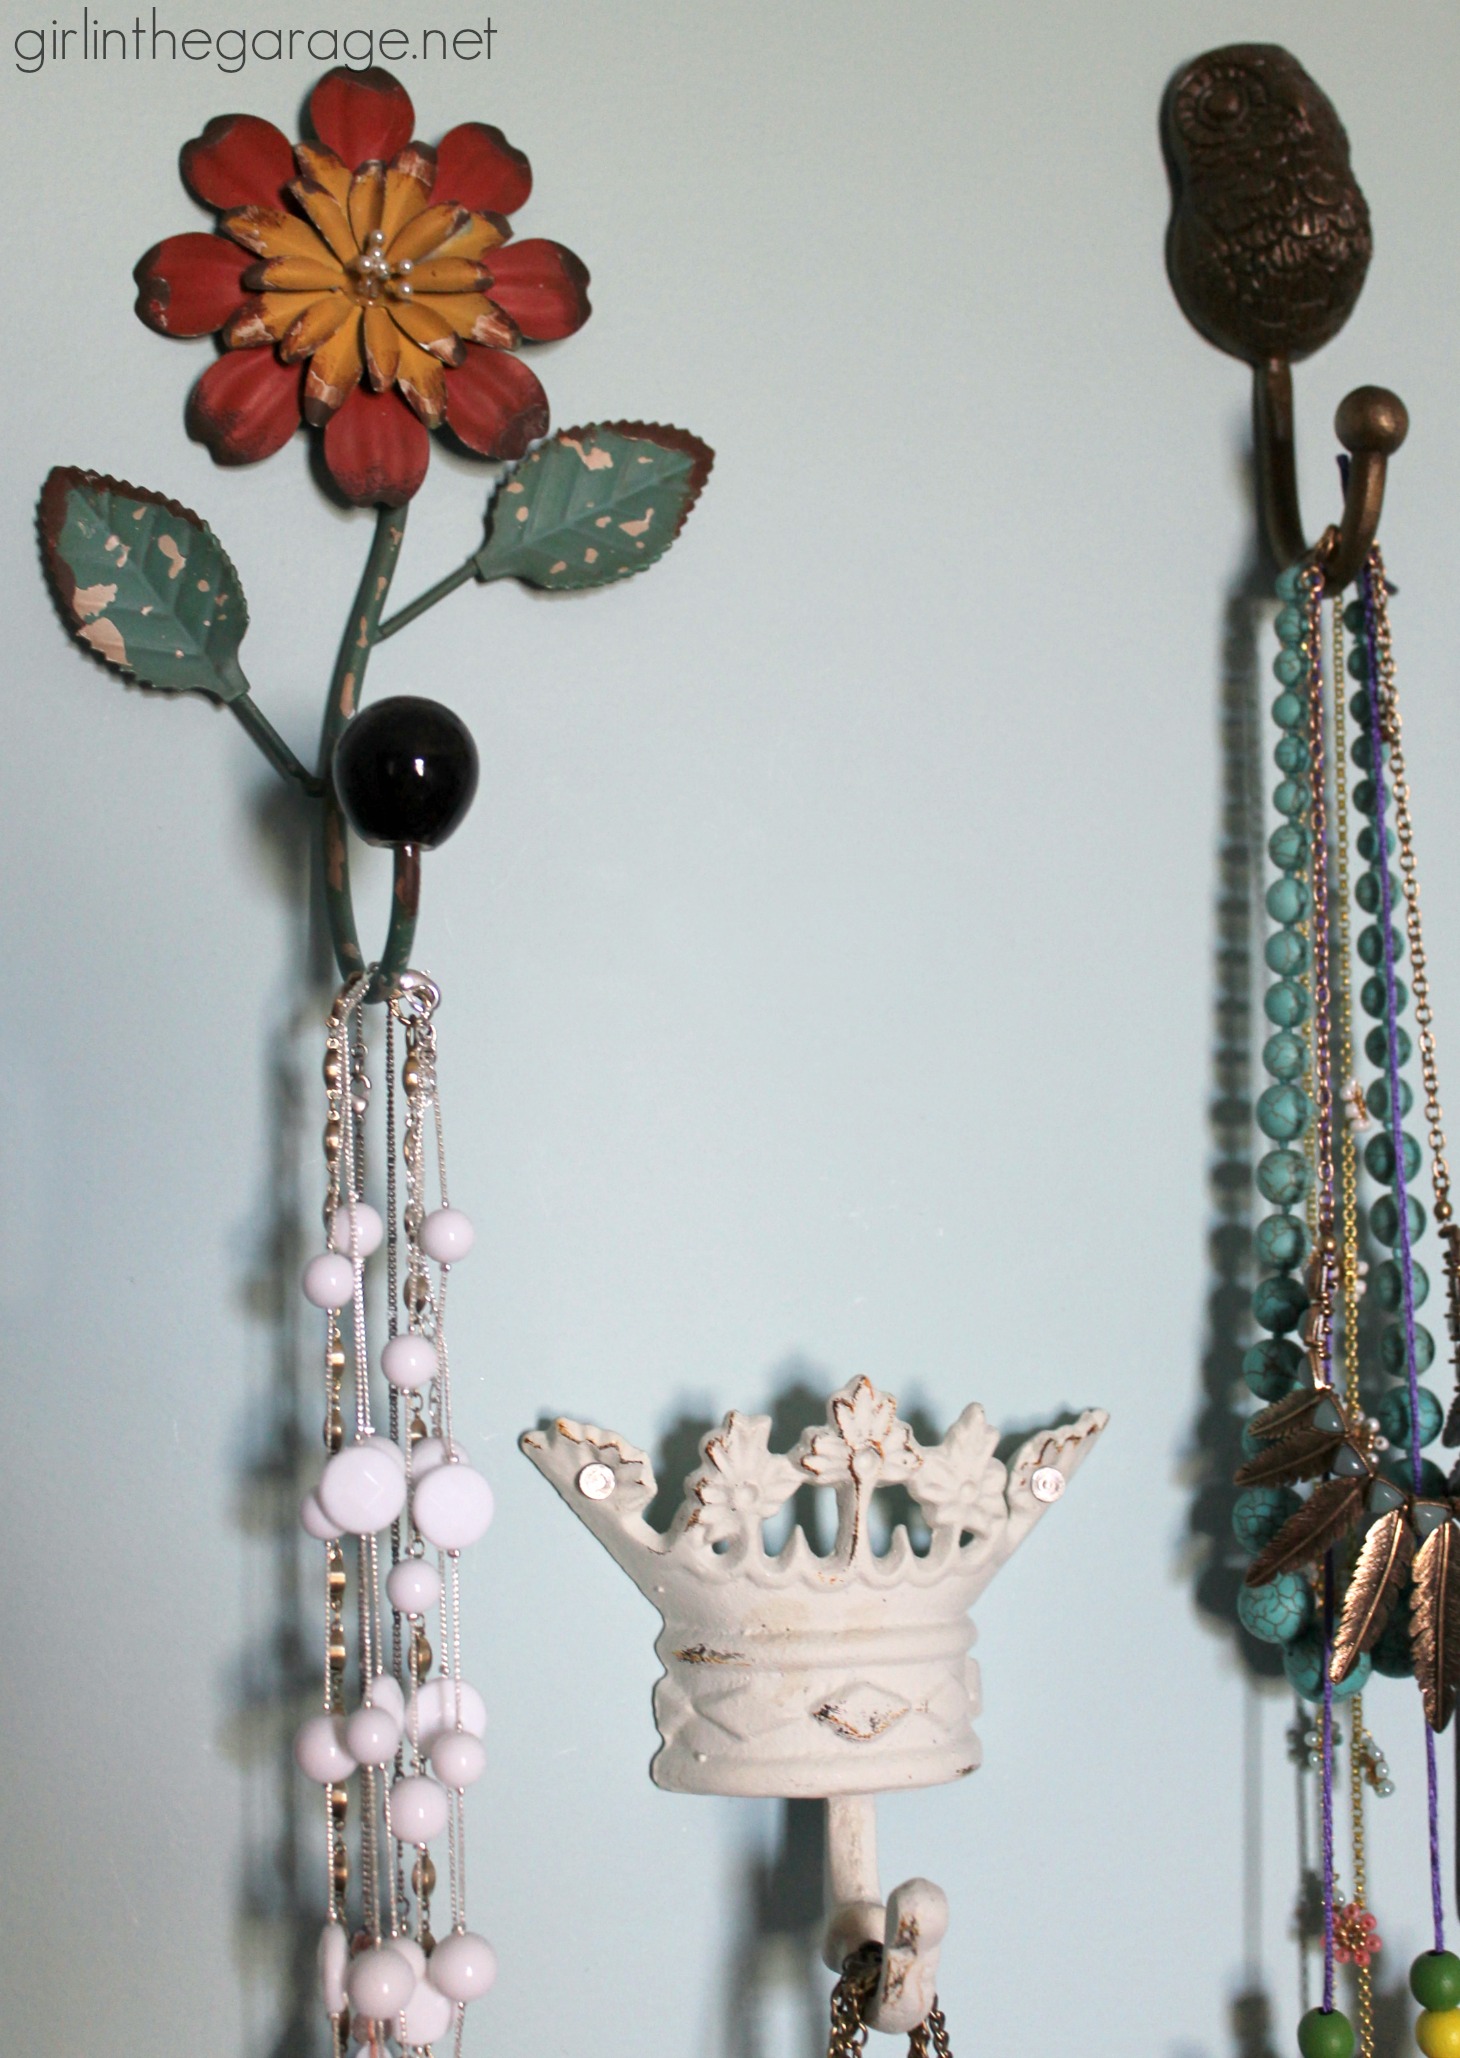 DIY jewelry wall to organize and display necklaces - by Girl in the Garage